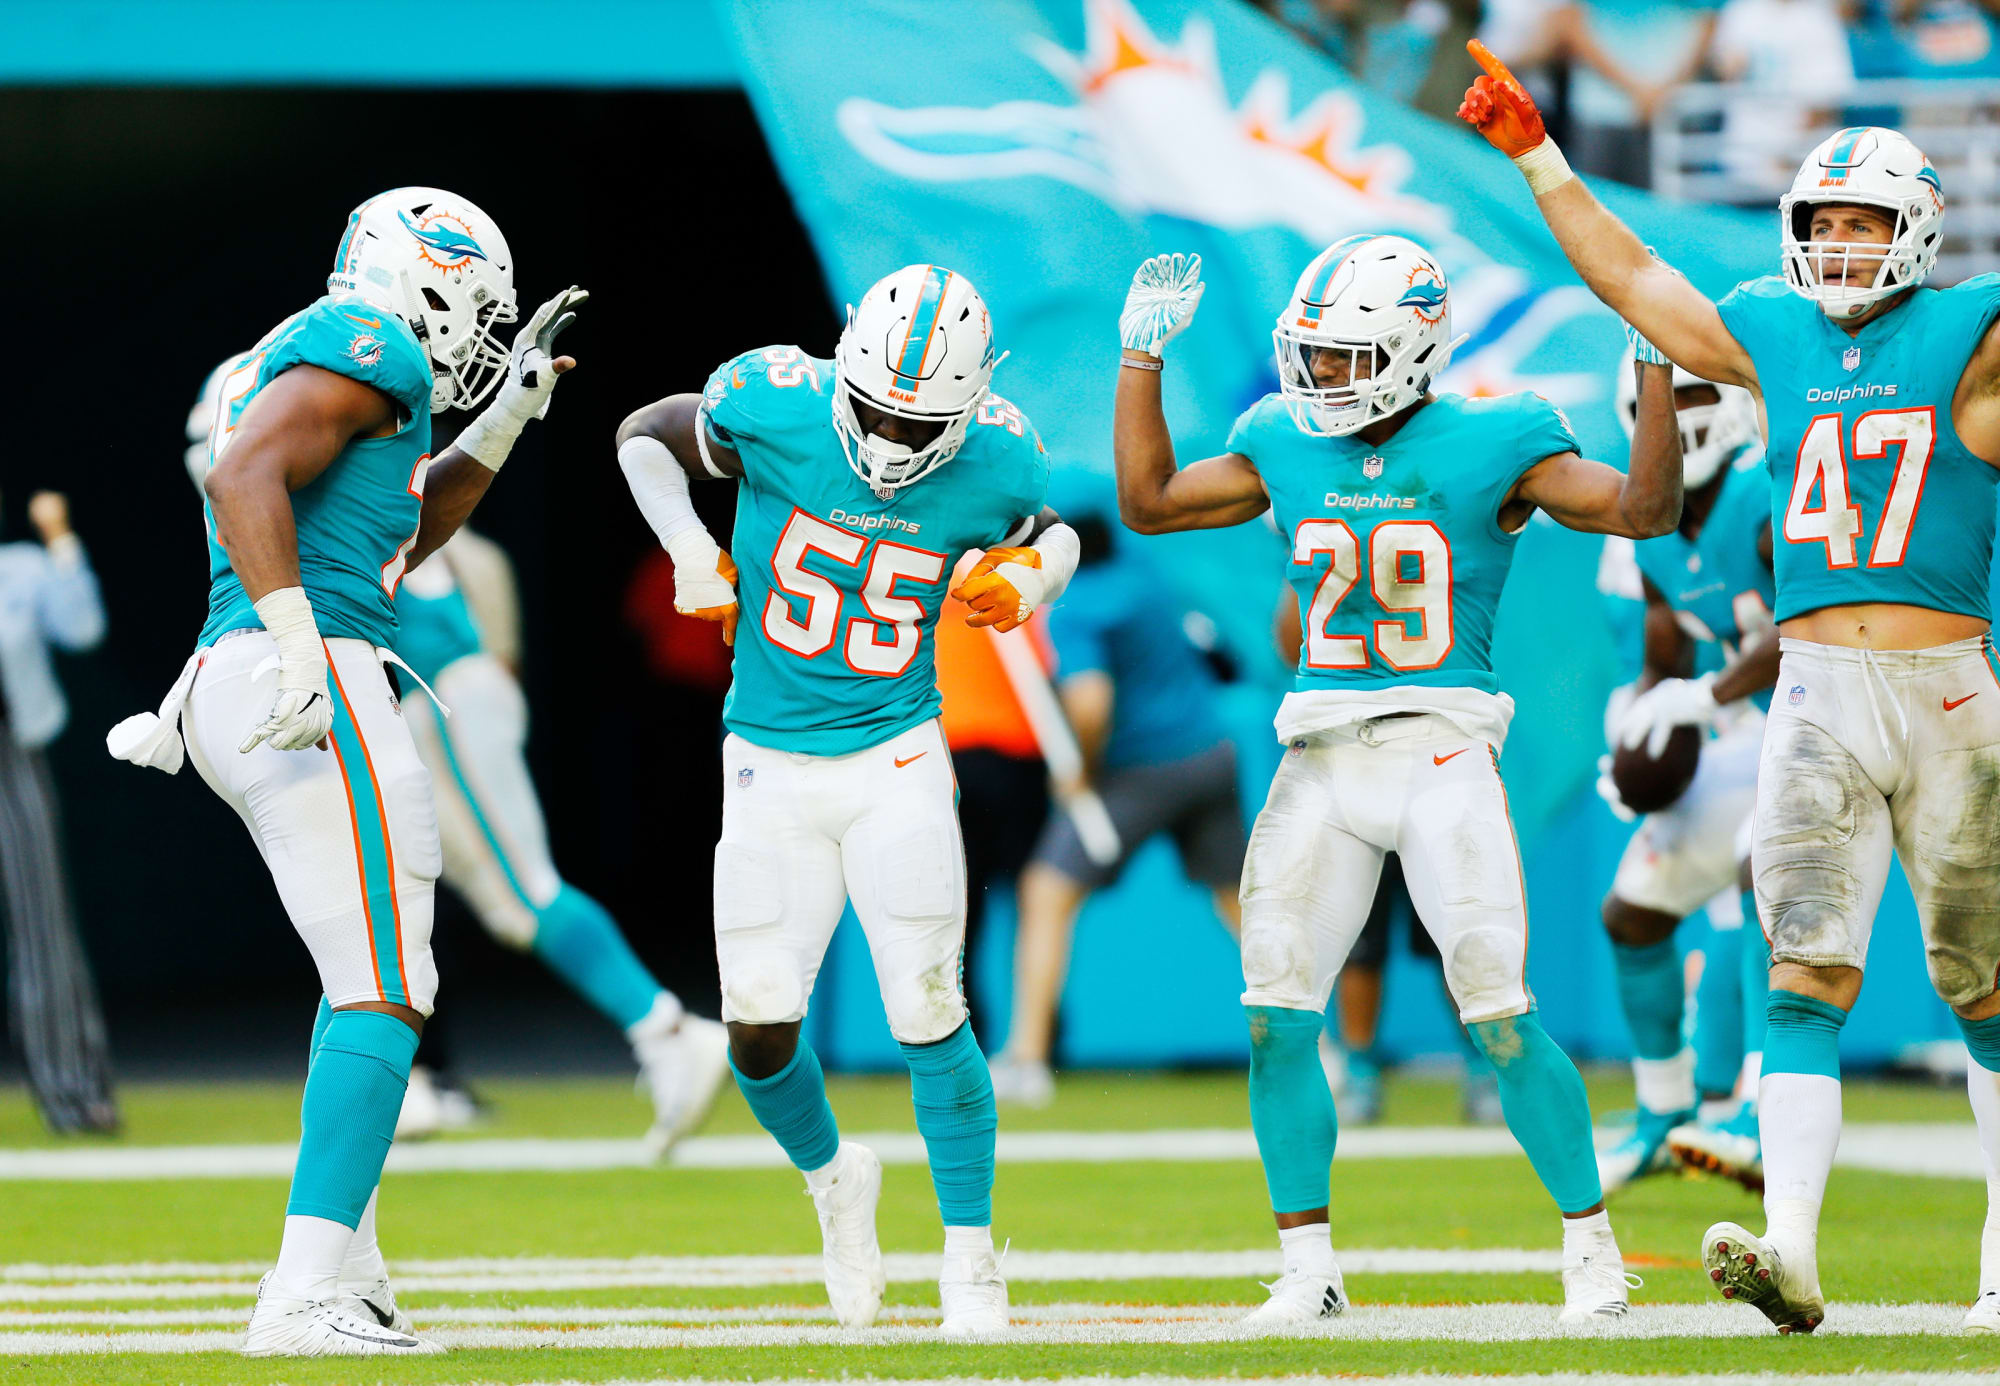 Miami Dolphins keep playoff hopes alive with AFC East win